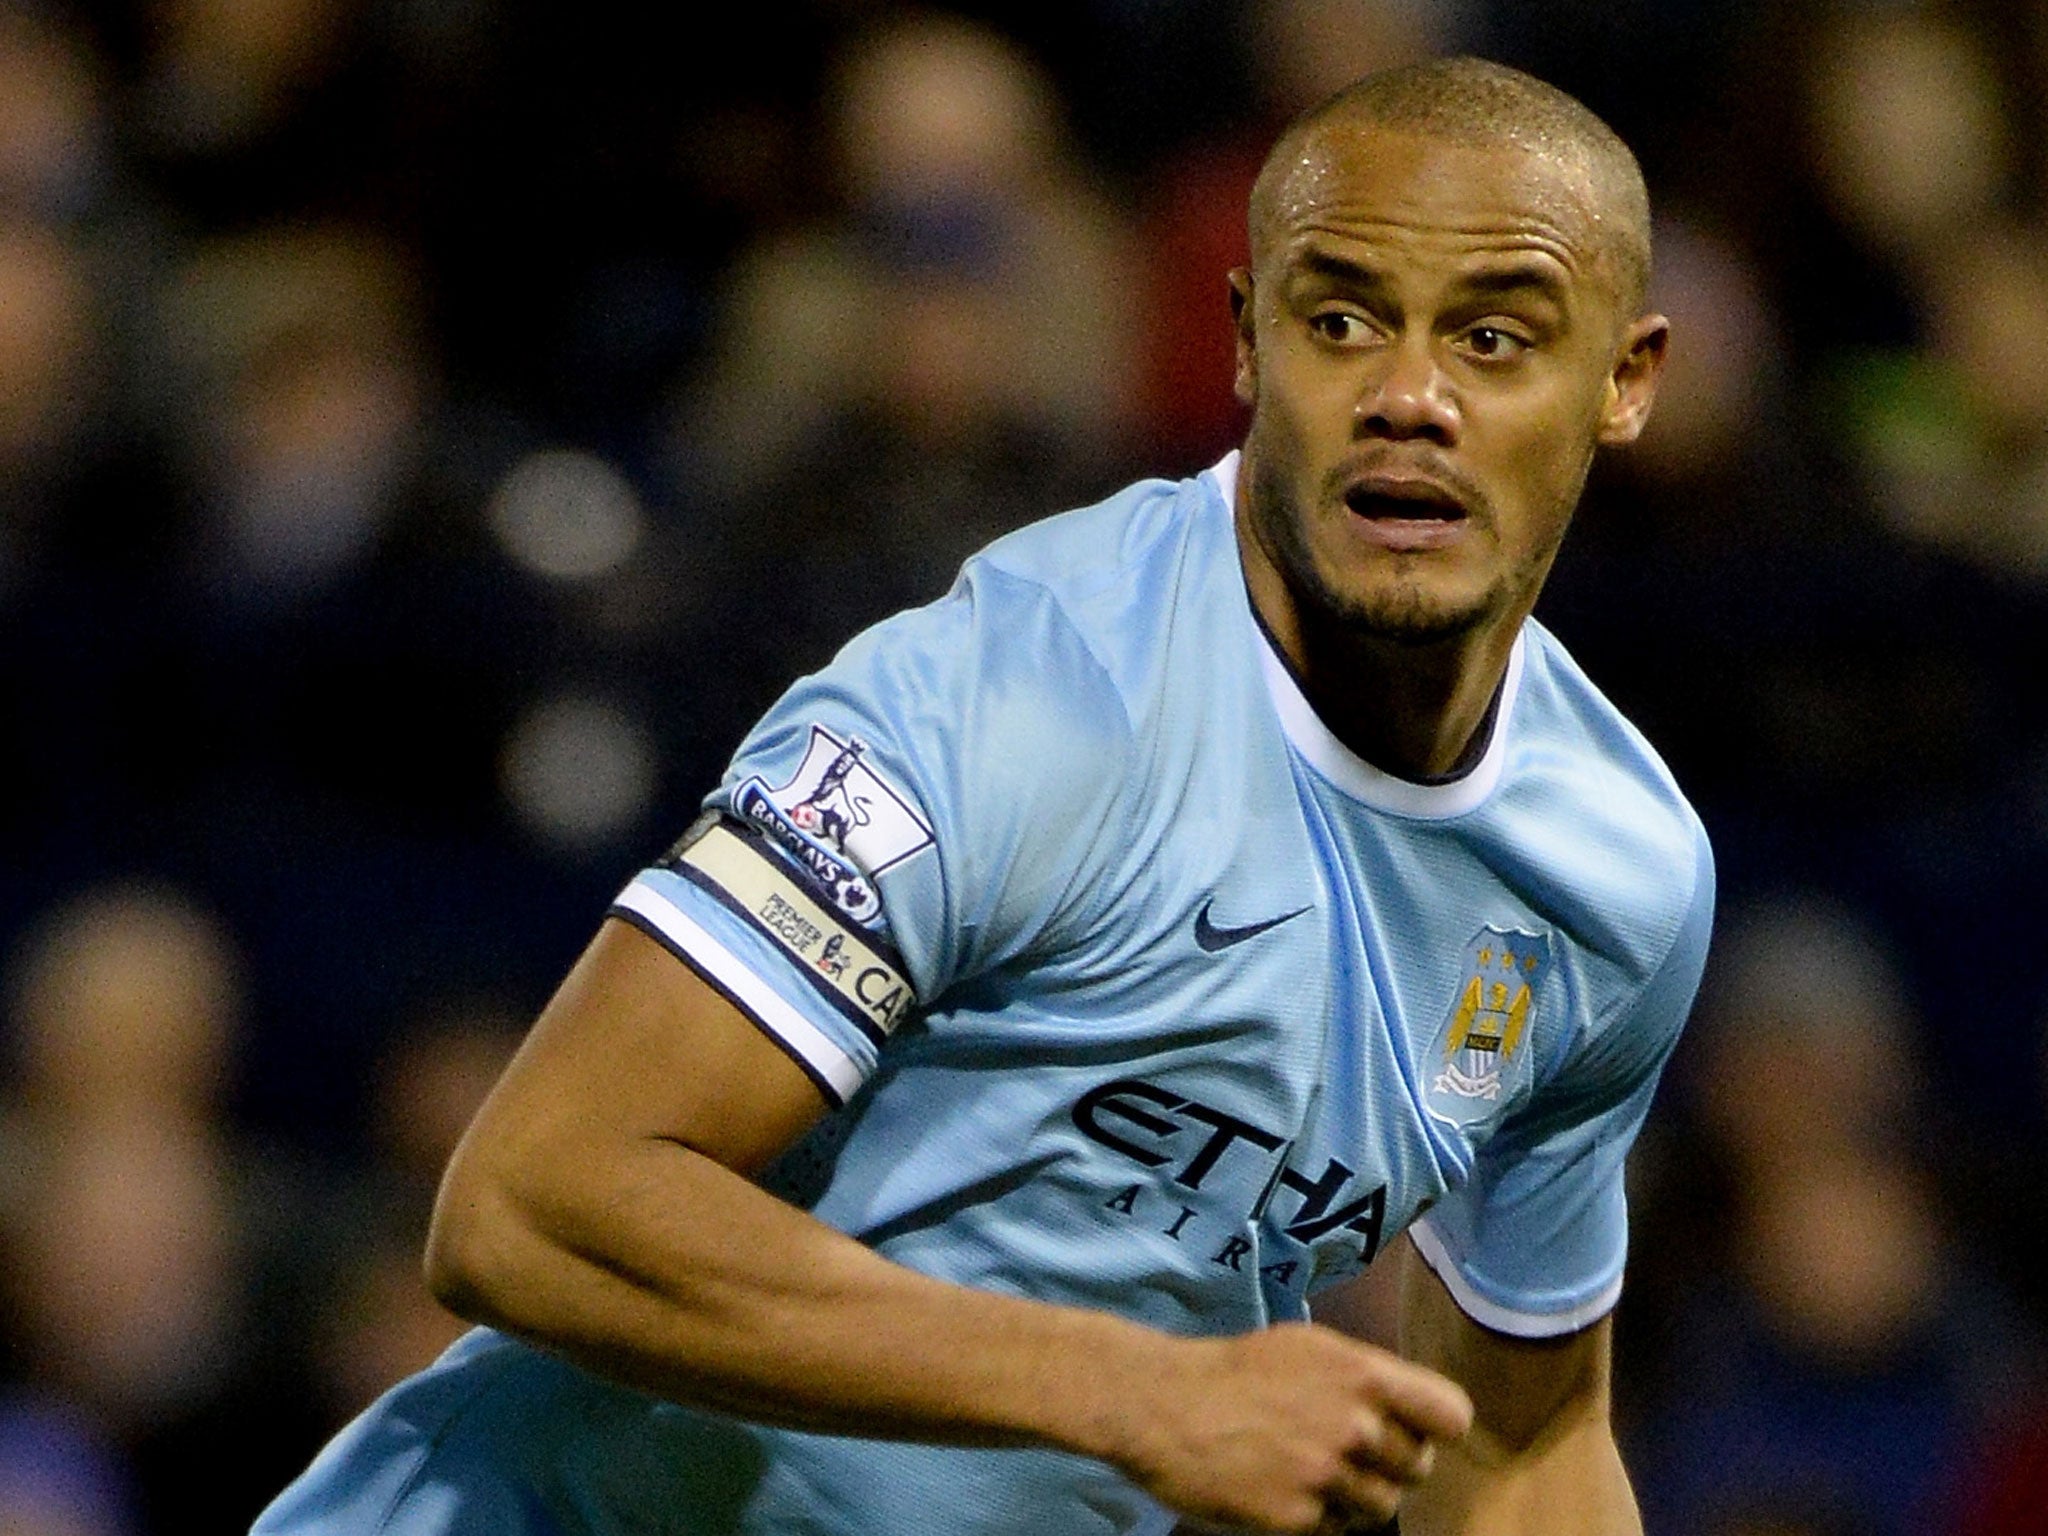 Manchester City captain Vincent Kompany is hoping that his injury troubles are behind him after making return against West Brom